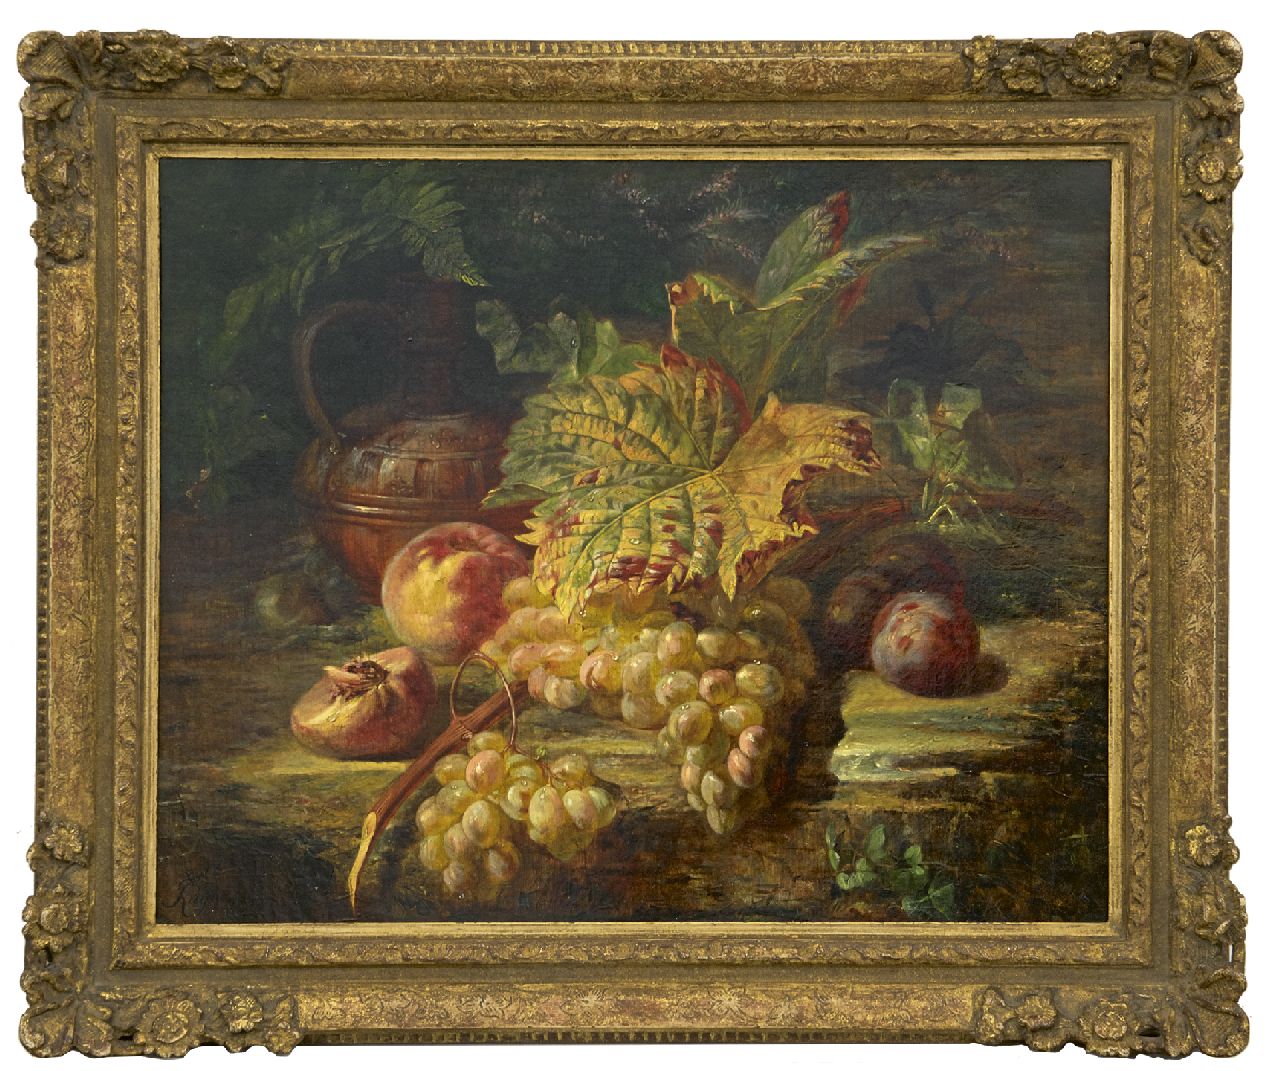 Huygens F.J.  | 'François' Joseph Huygens | Paintings offered for sale | A still life with grapes, oil on canvas 48.6 x 59.5 cm, signed l.l. and dated '60